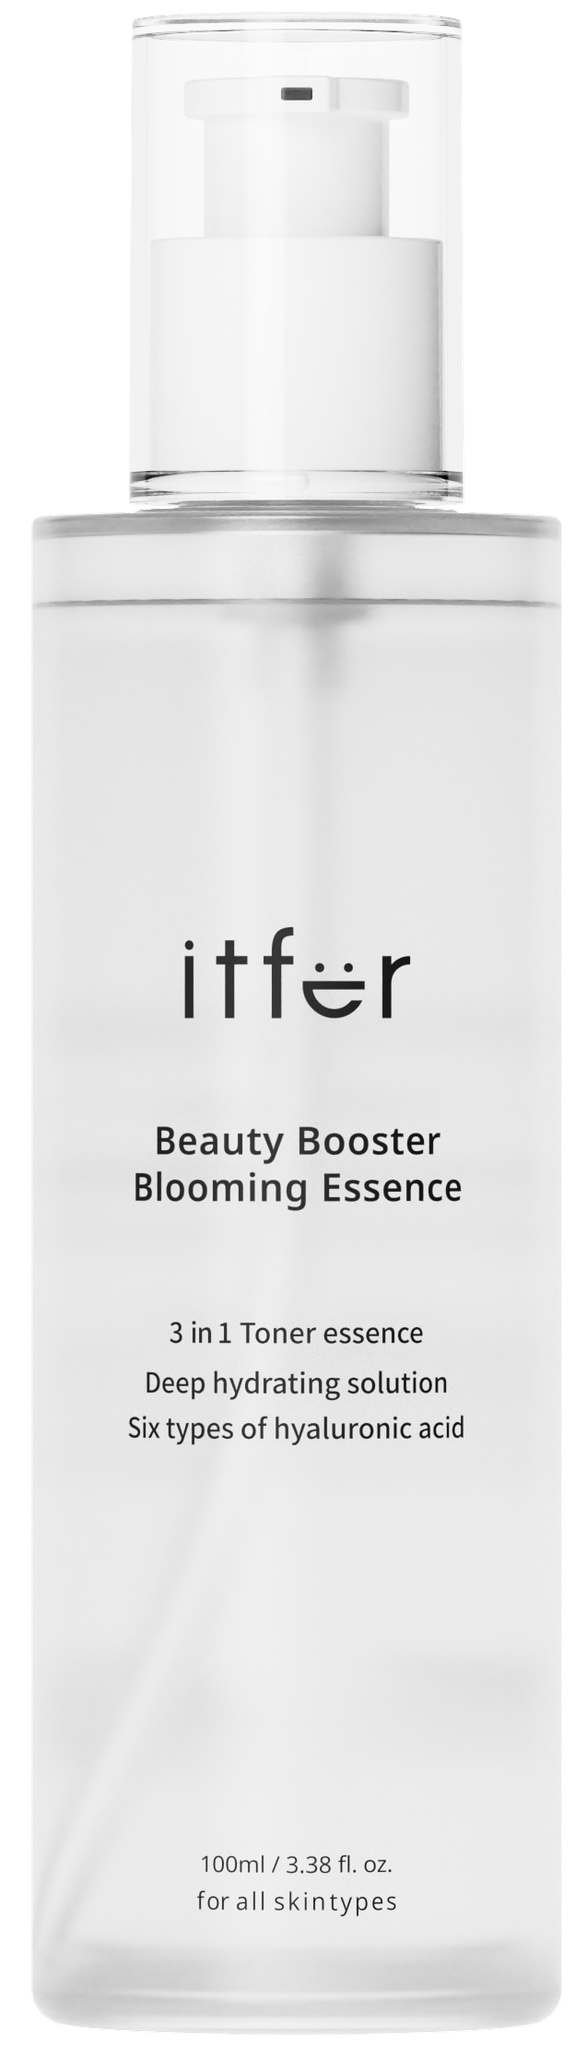 ITFER Beauty Booster Blooming Essence